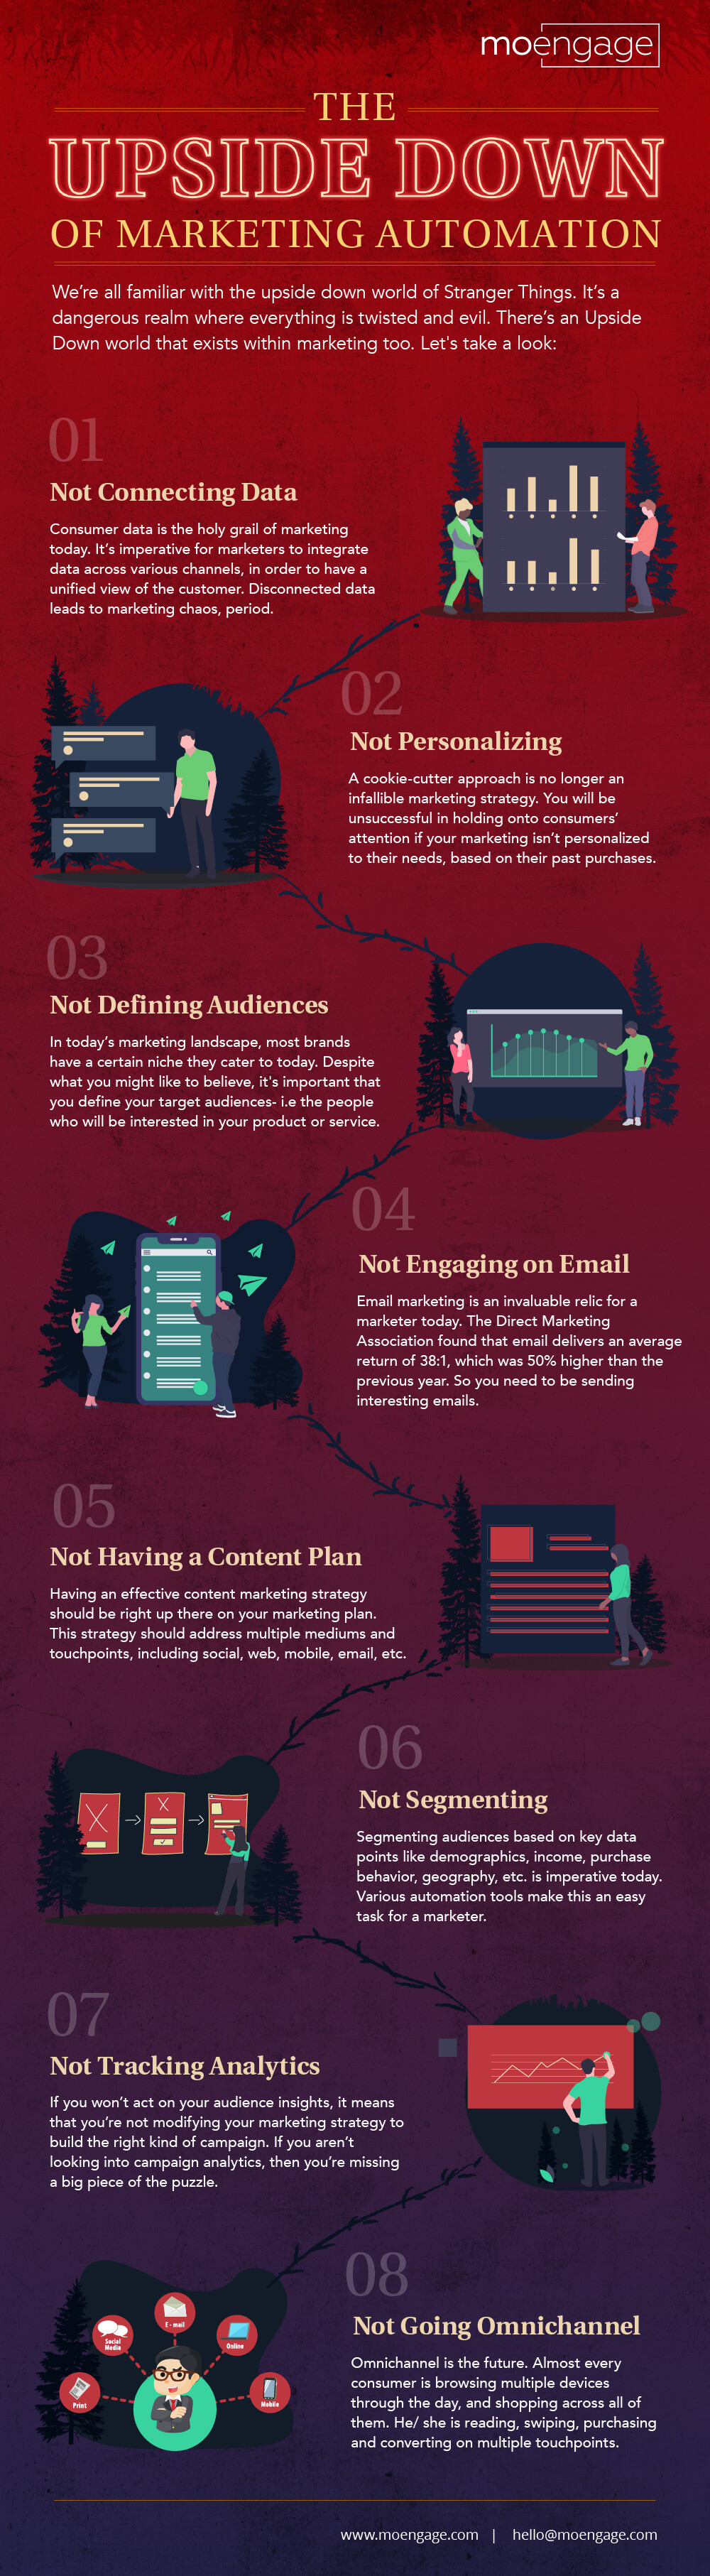 [Infographic] The Upside Down of Marketing Automation